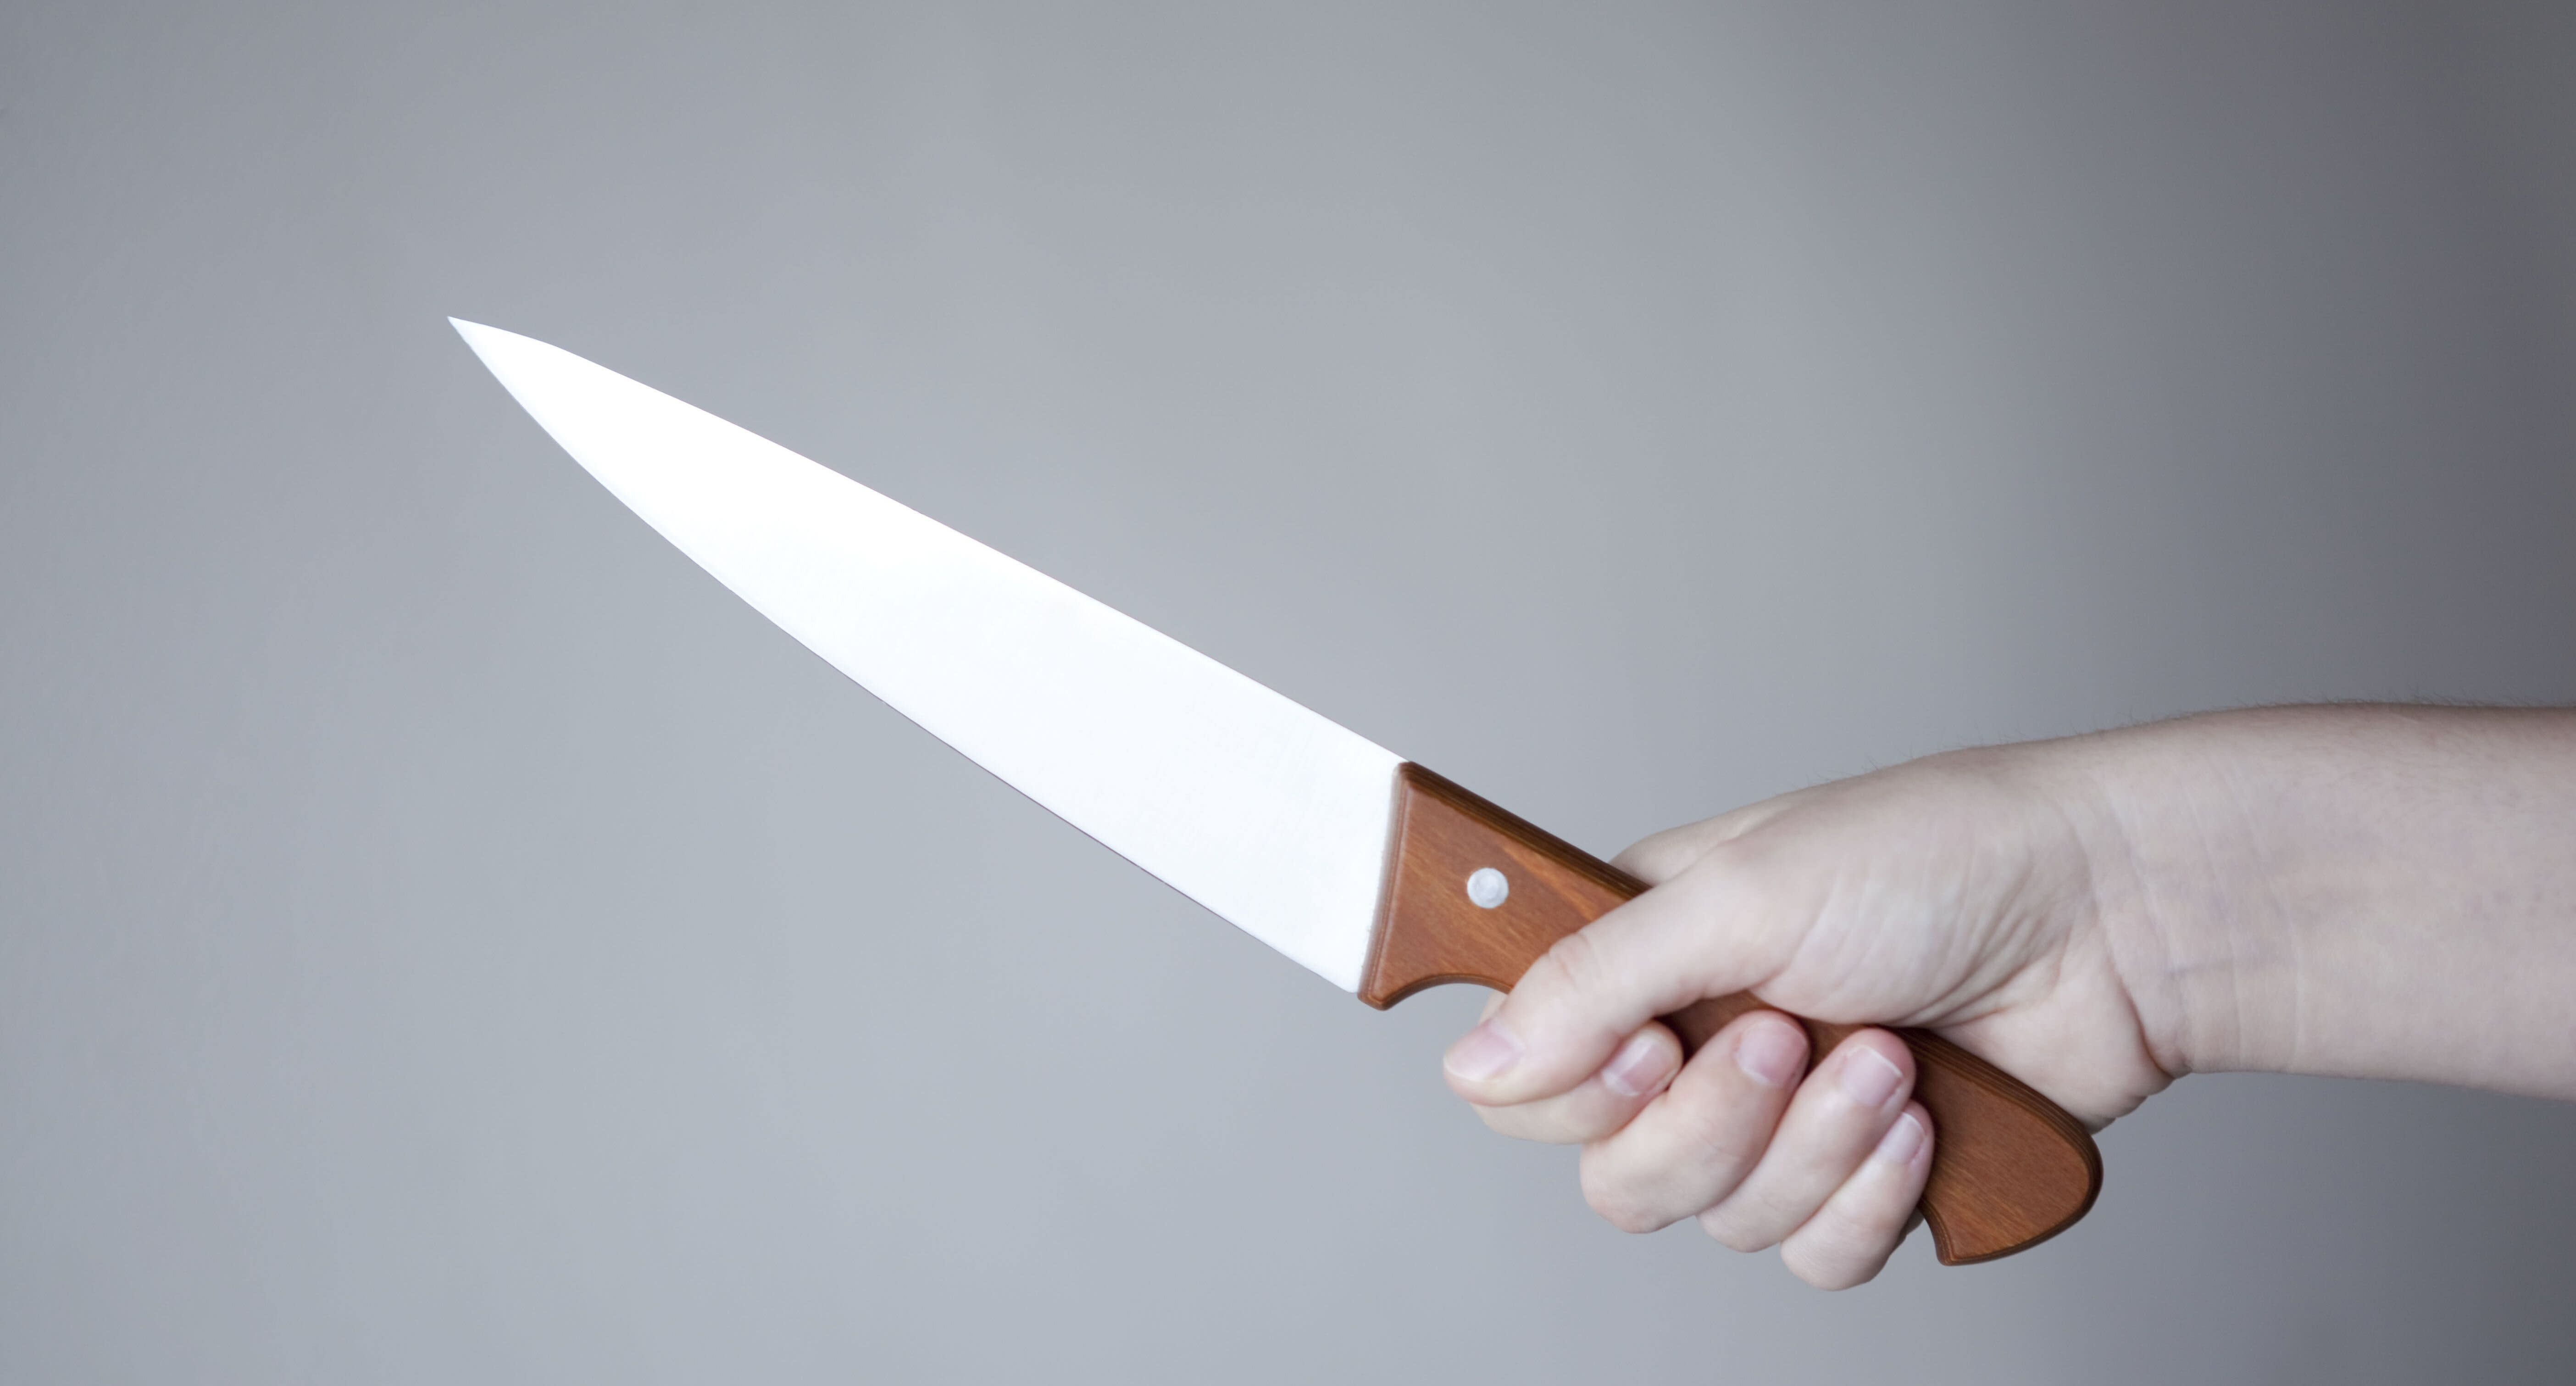 ...000 a few times, a 16-year-old student stabbed and slashed the older man...